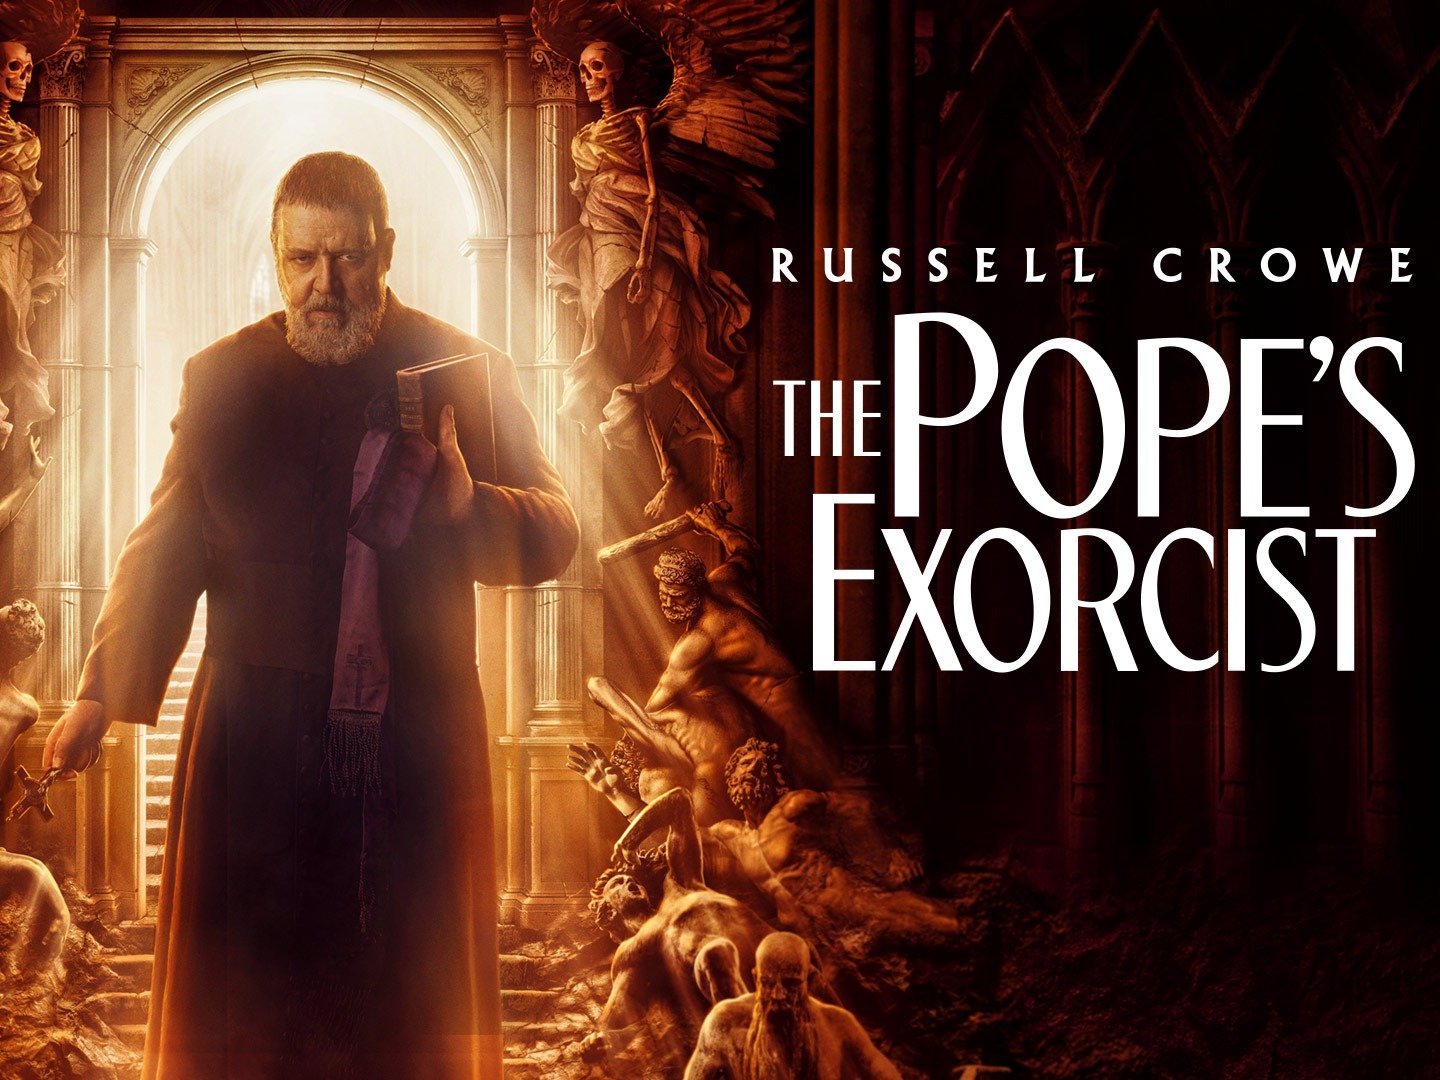 The Pope's Exorcist review – demonslayer-in-chief Russell